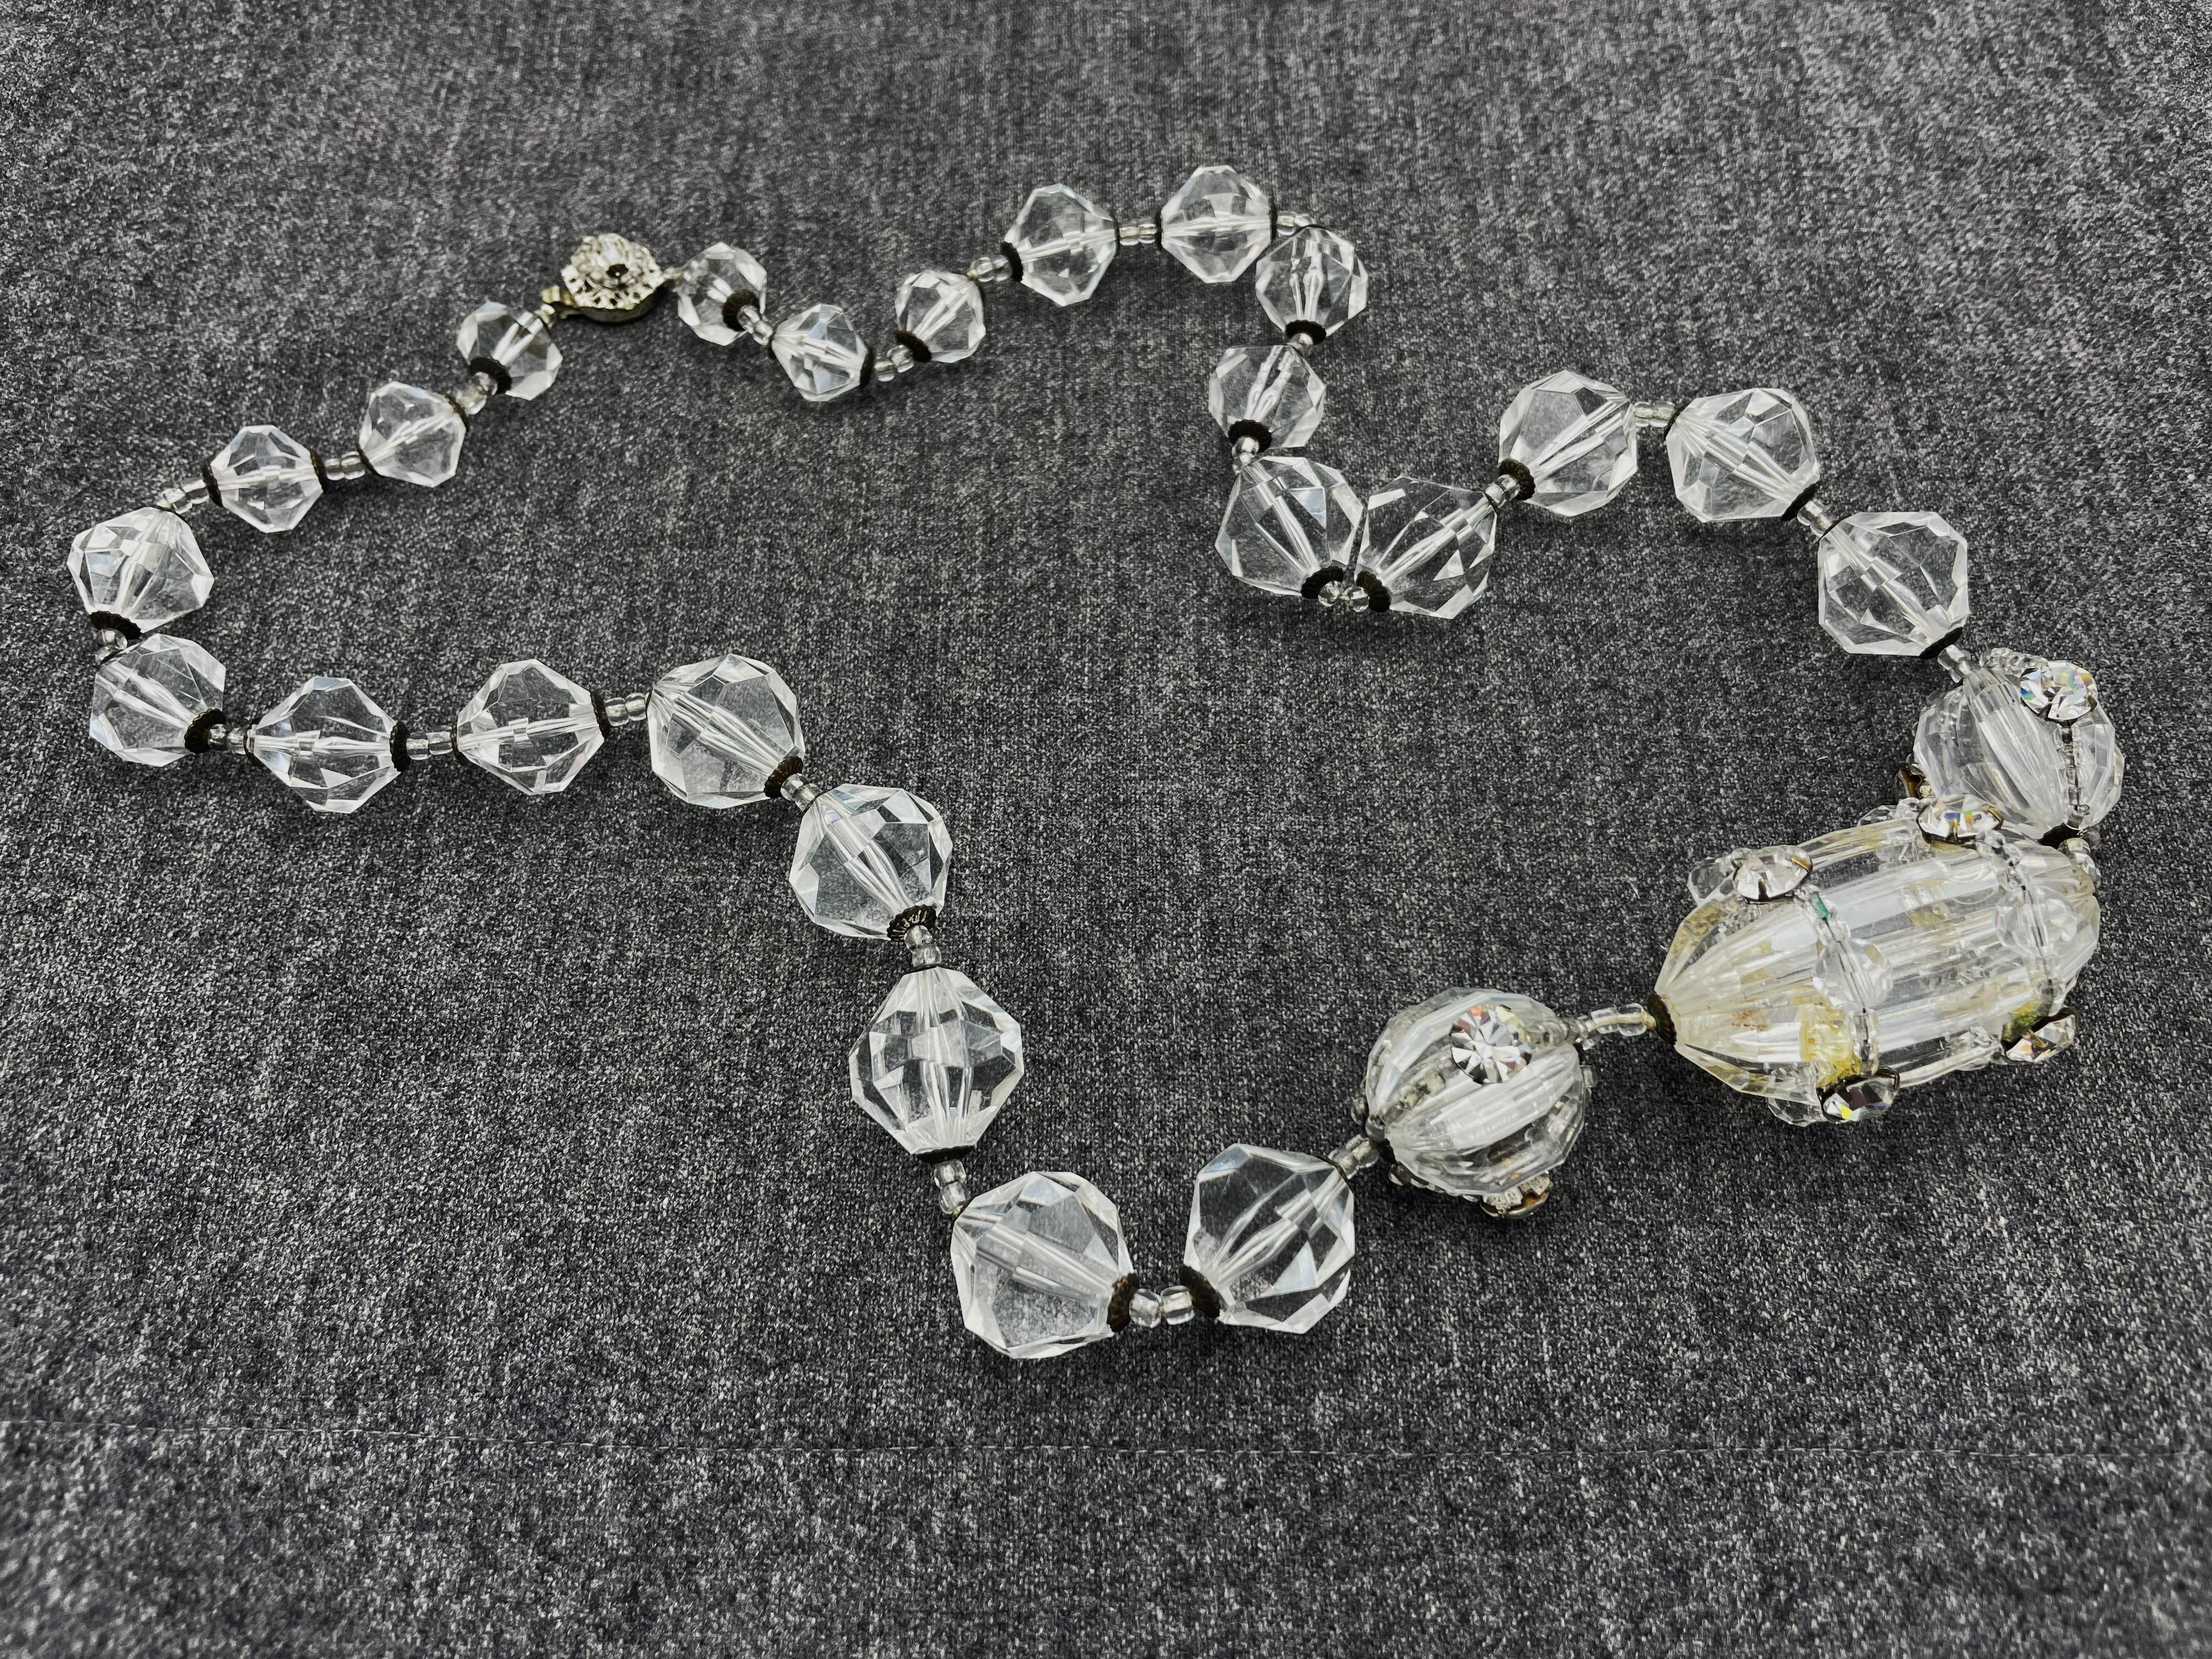 Women's Miriam Haskell necklace with large cut Lucite balls, rhinstones, 1950's USA For Sale